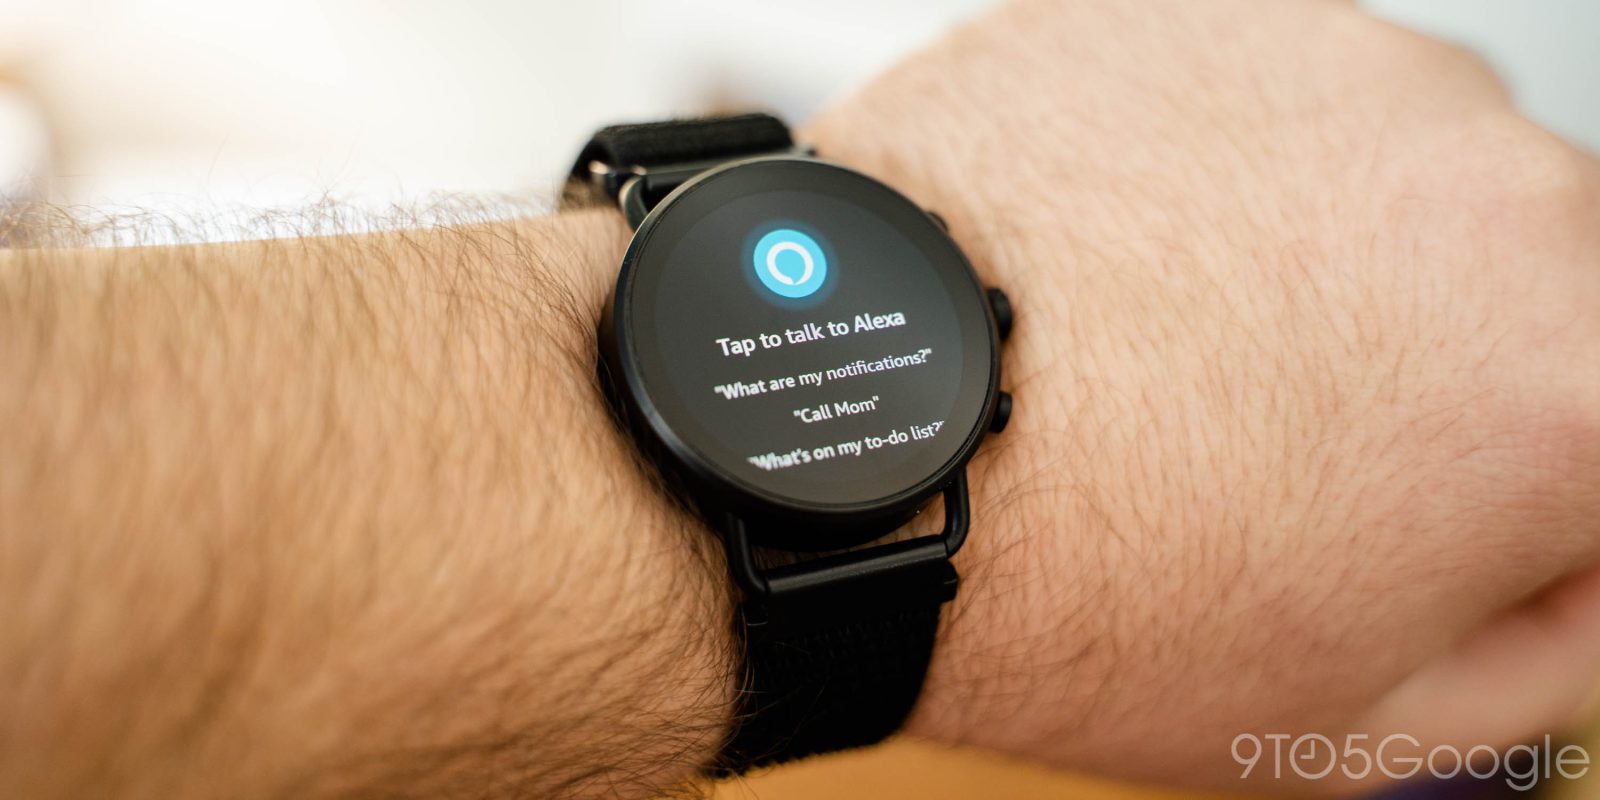 Alexa is now available on select Wear OS smartwatches - 9to5Google